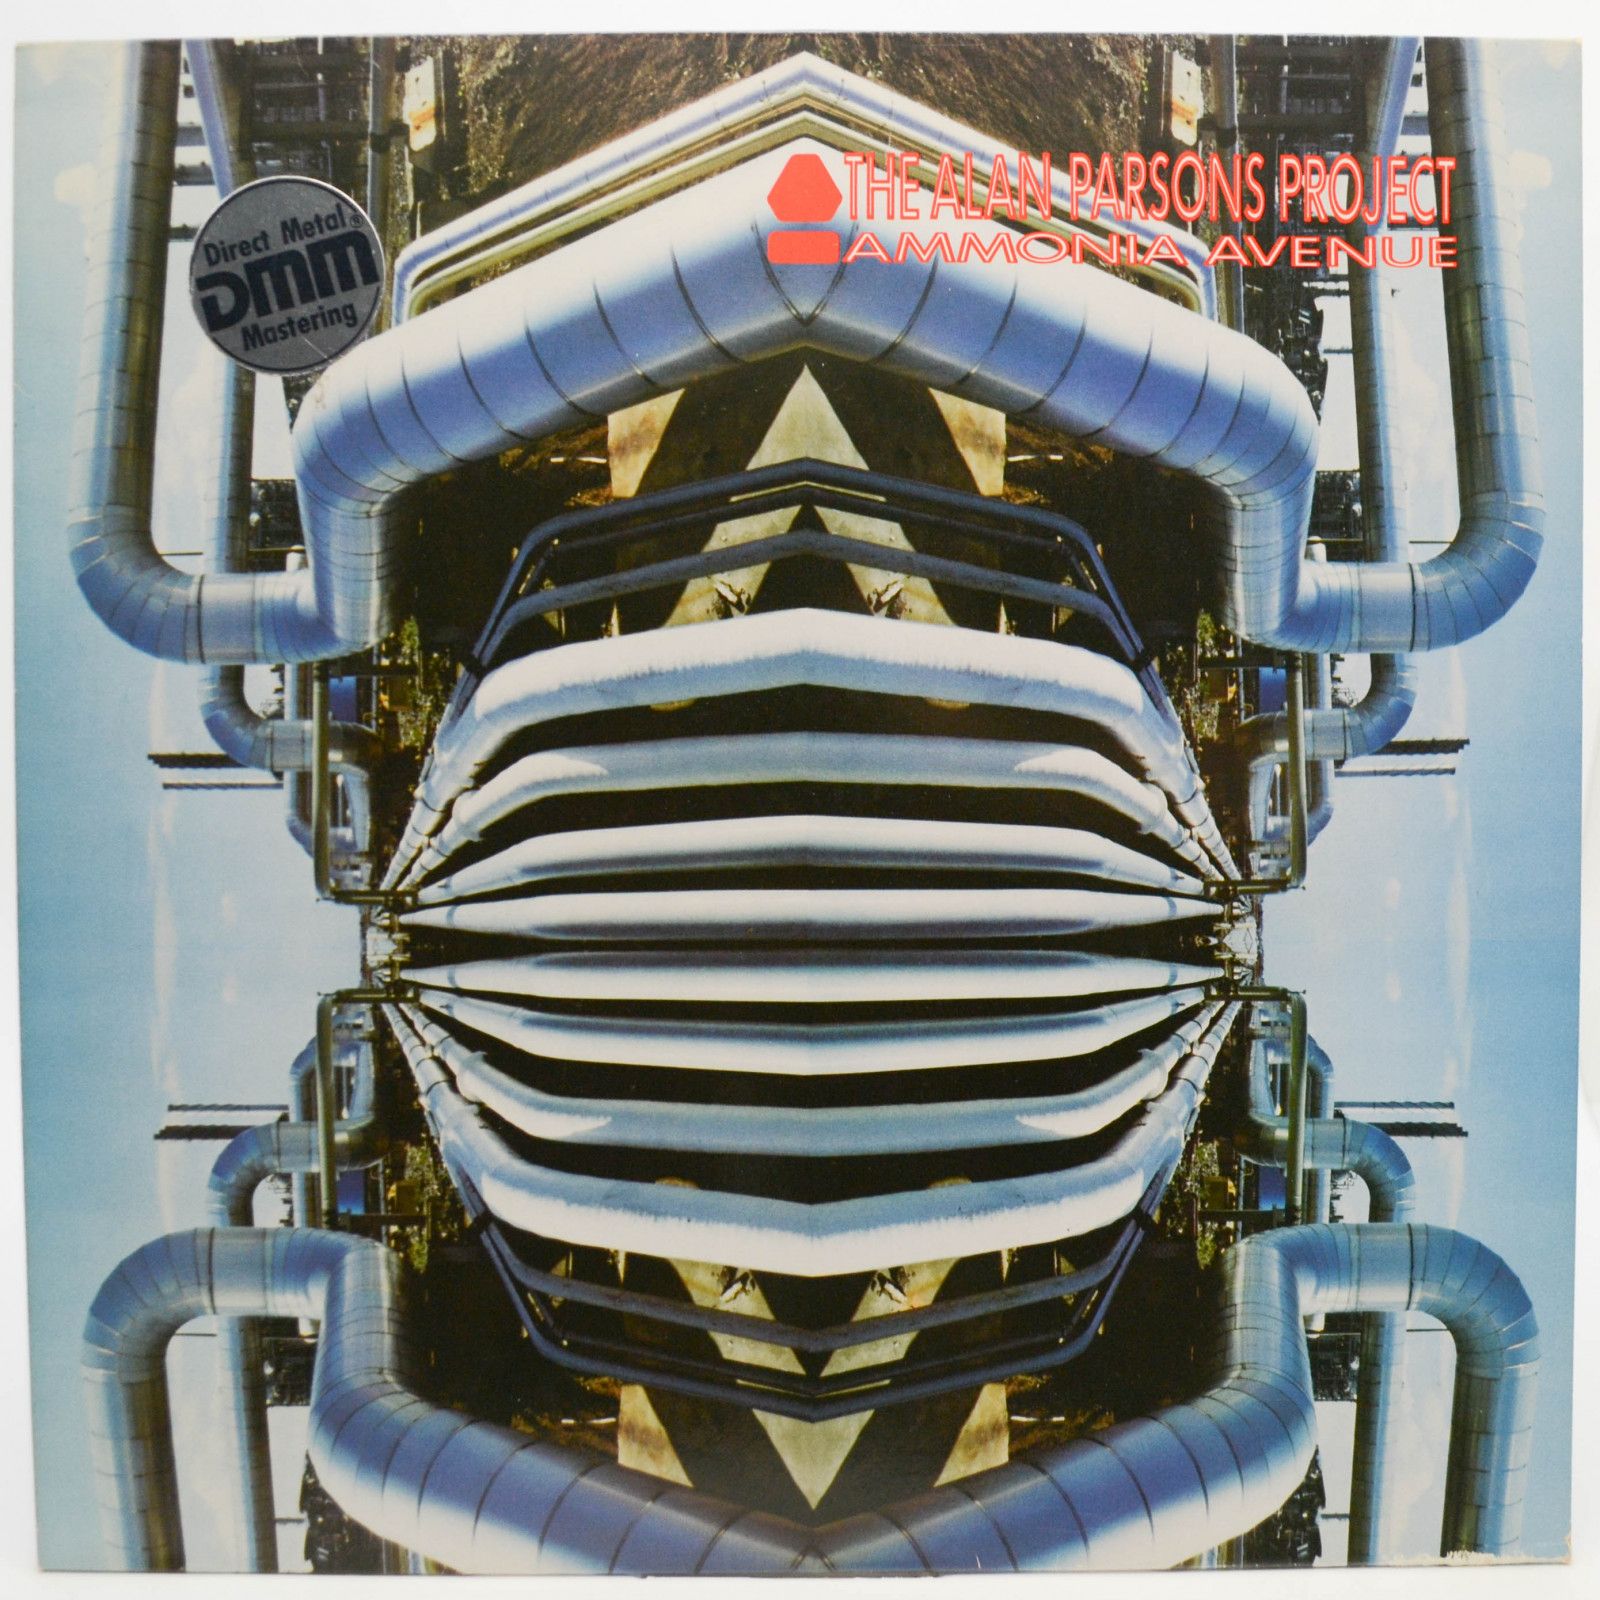 The Alan Parsons Project — Ammonia Avenue, 1984